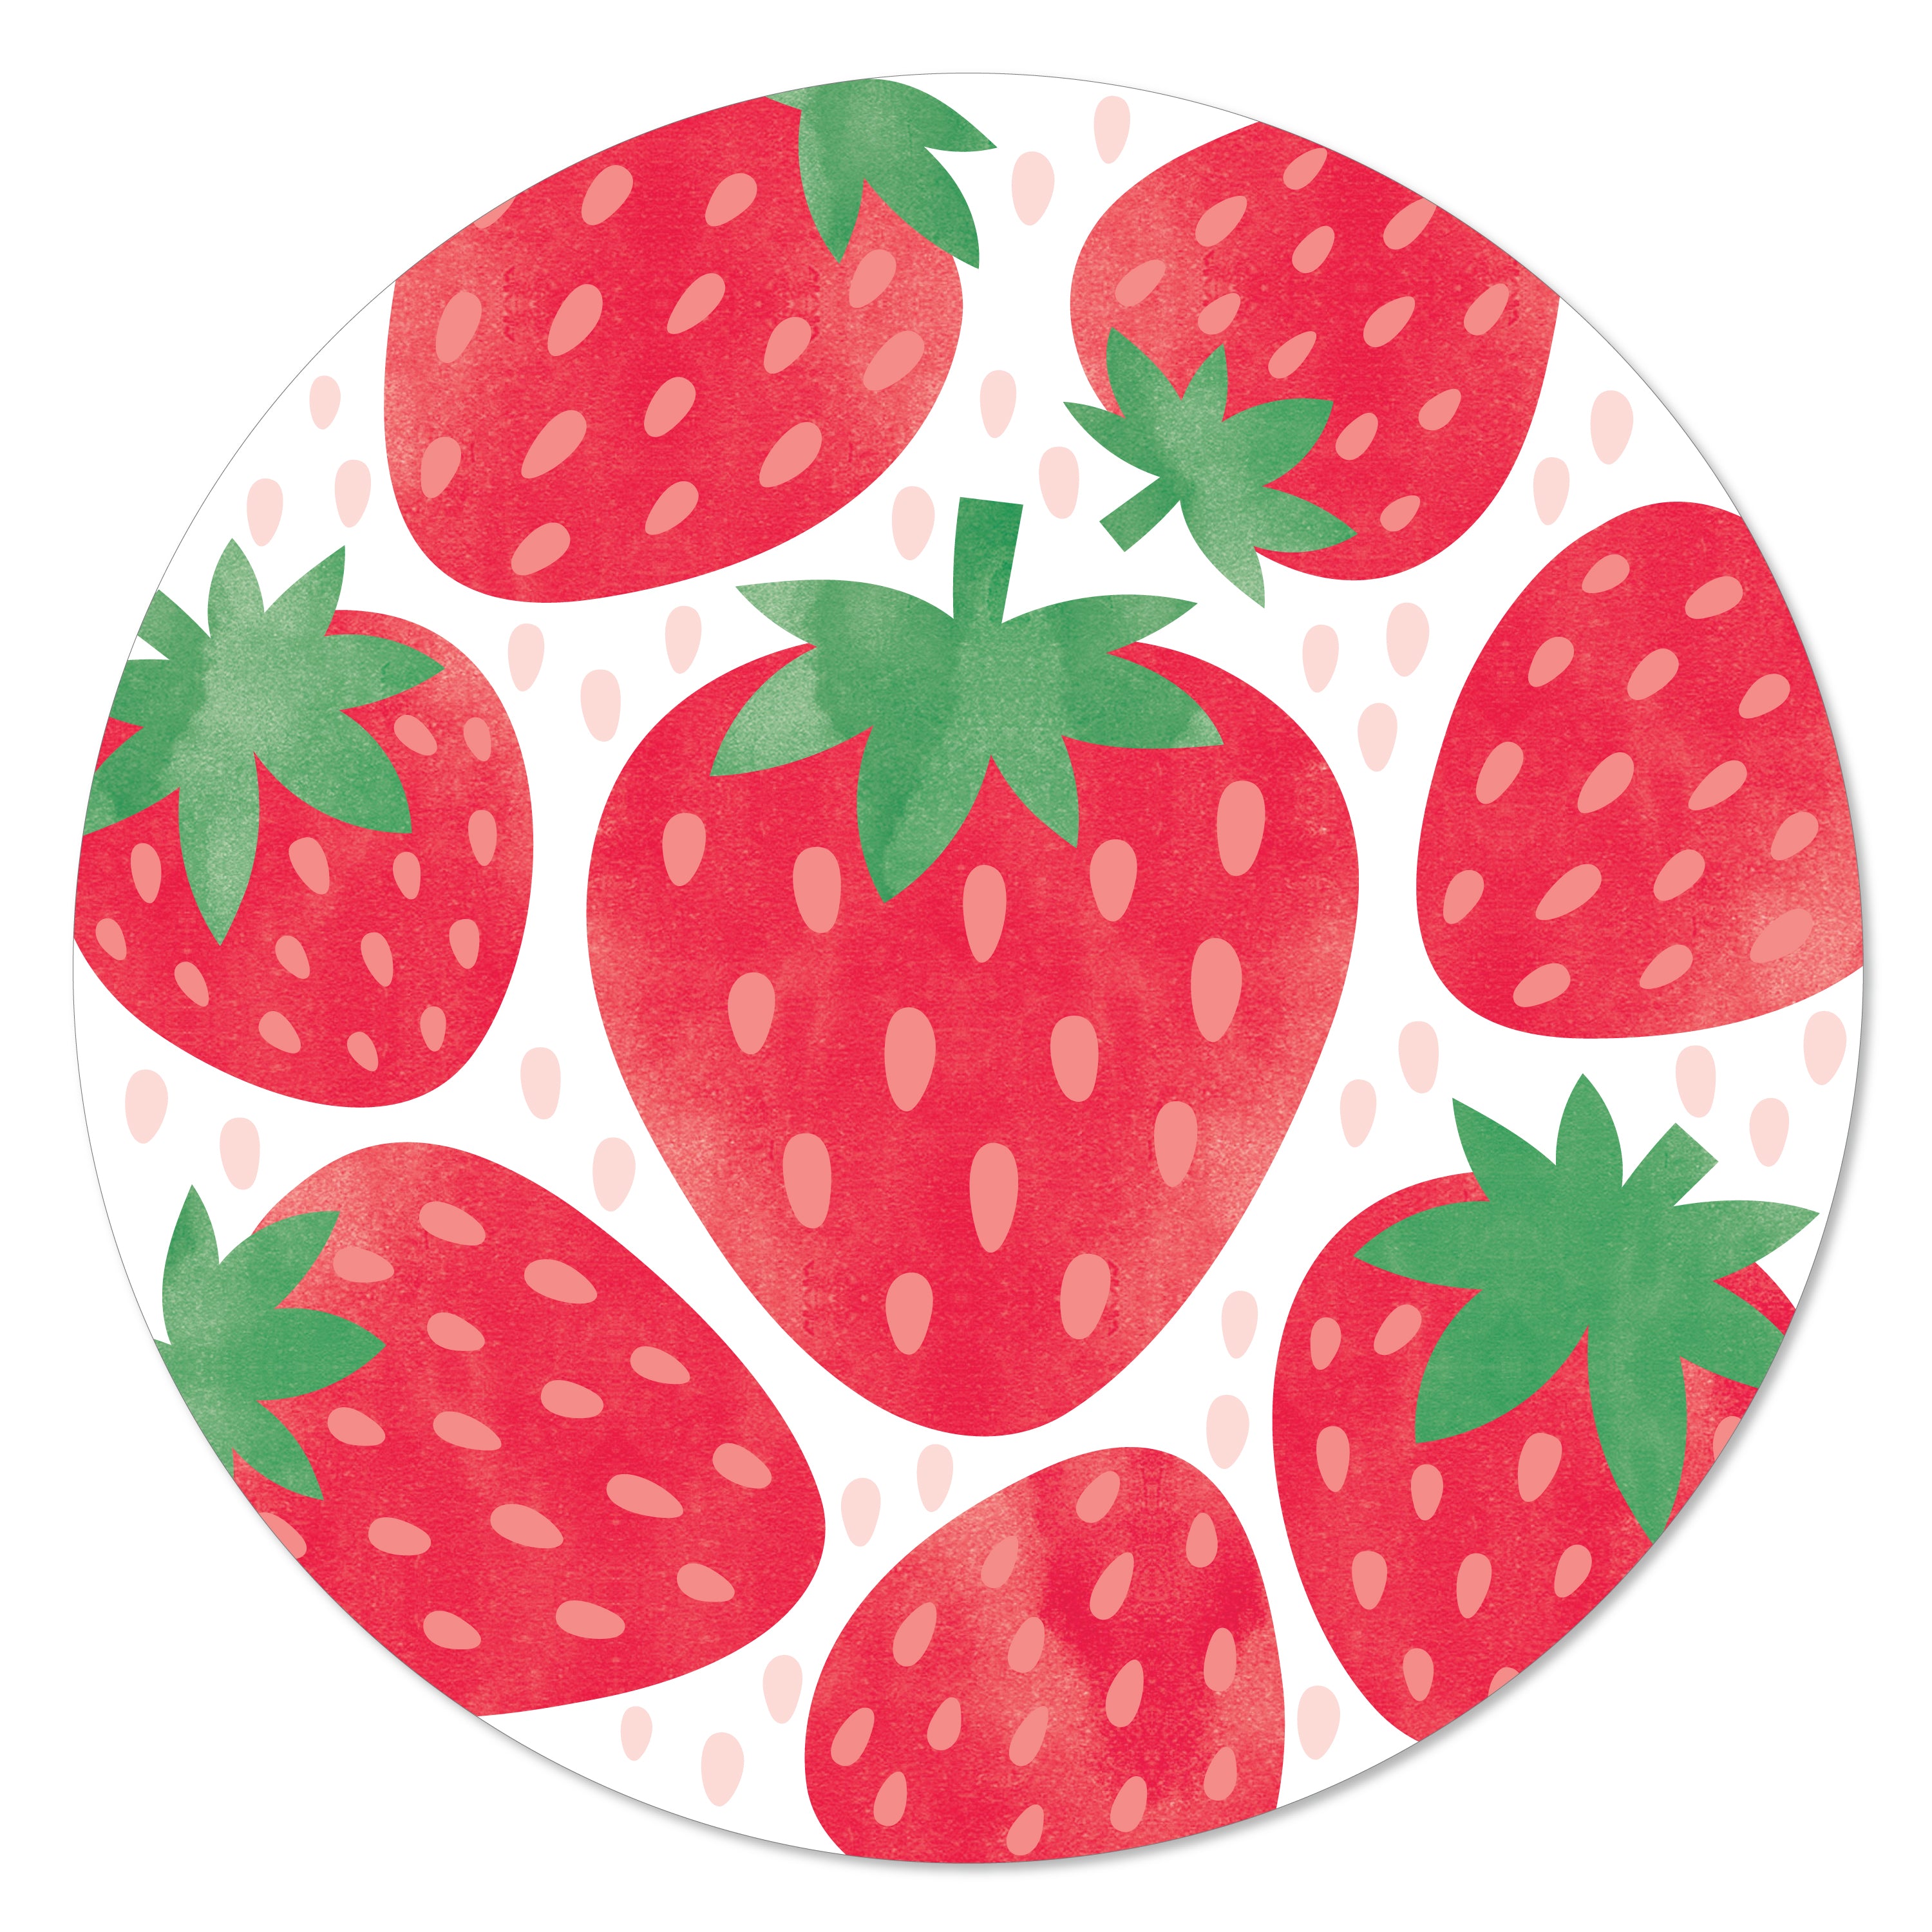 Berry Sweet Strawberry - Fruit Themed Birthday Party or Baby Shower  Centerpiece Sticks - Table Toppers - Set of 15